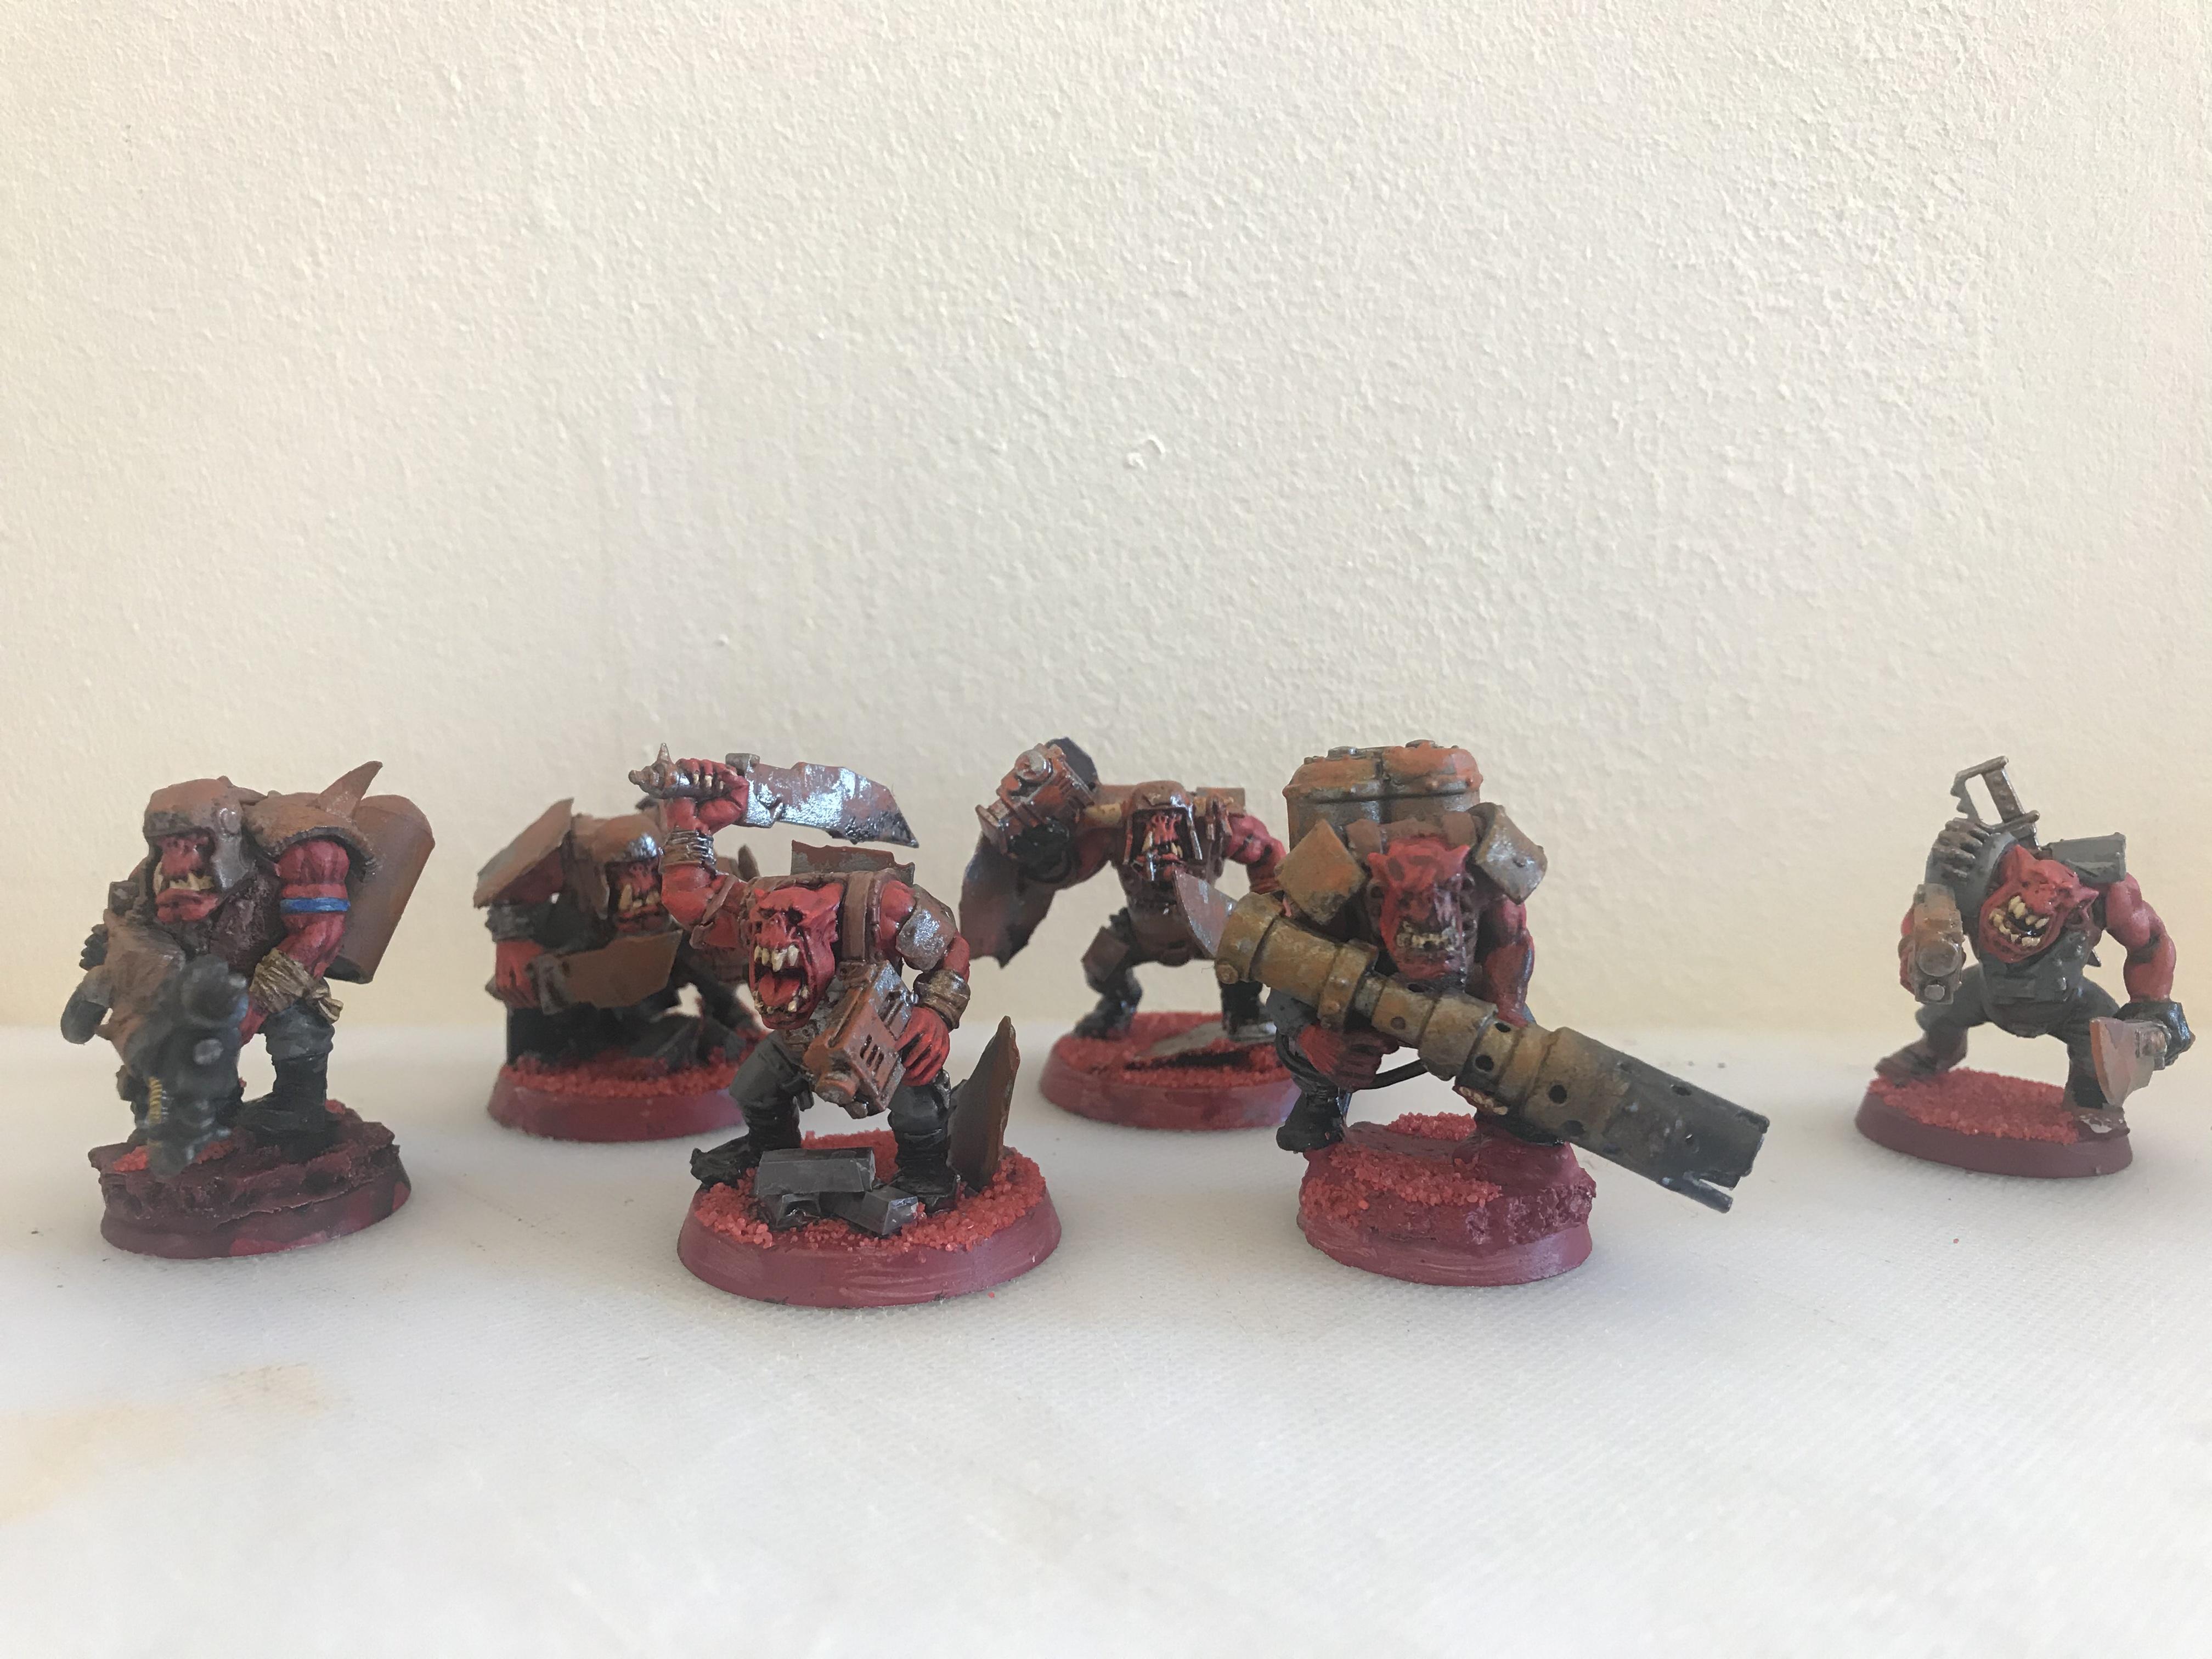 Boy, Orks, Commandos compared to a normal ork